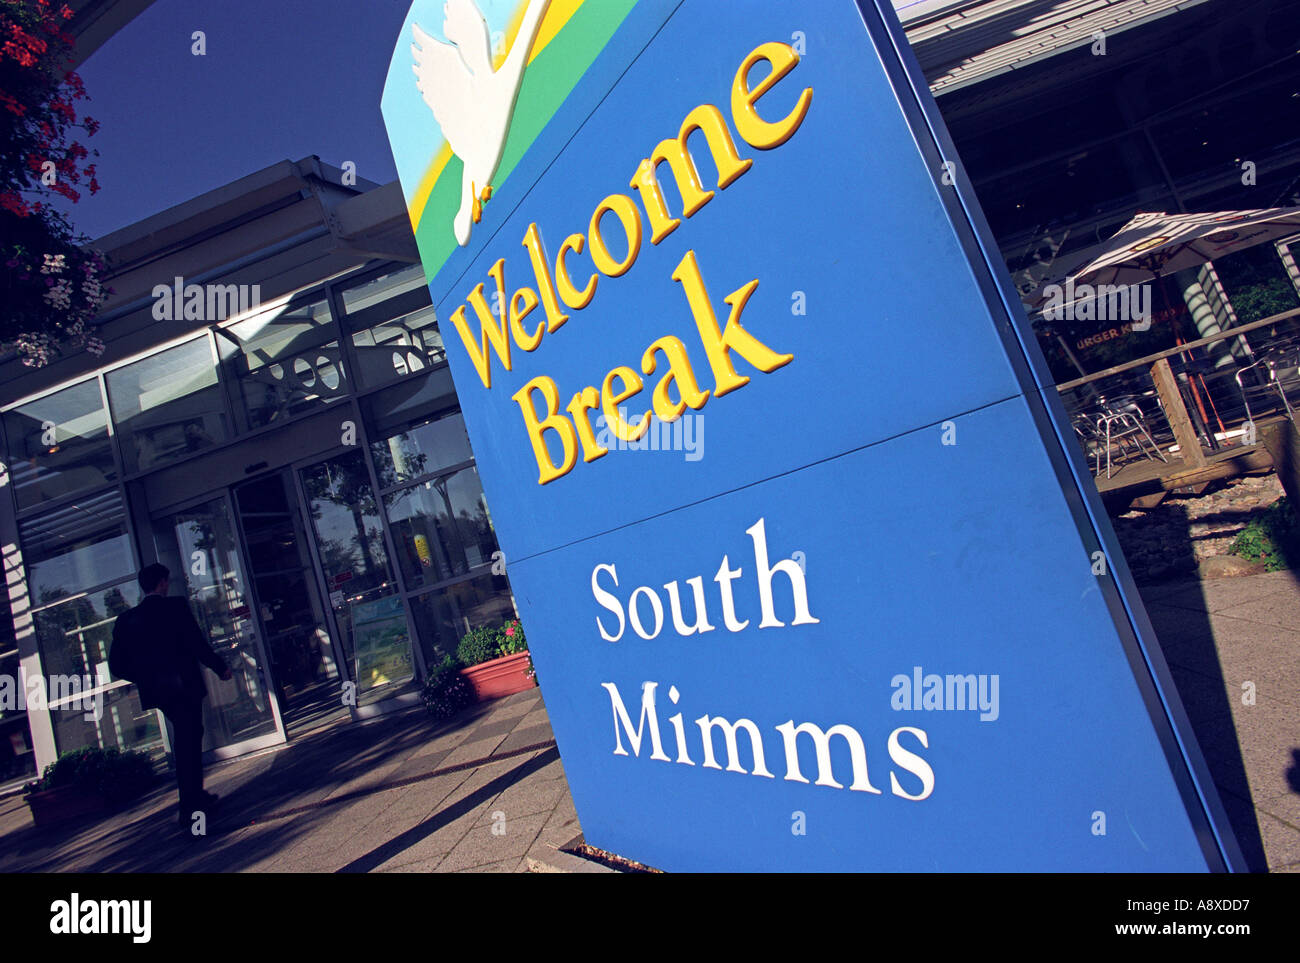 South Mimms service station Stock Photo